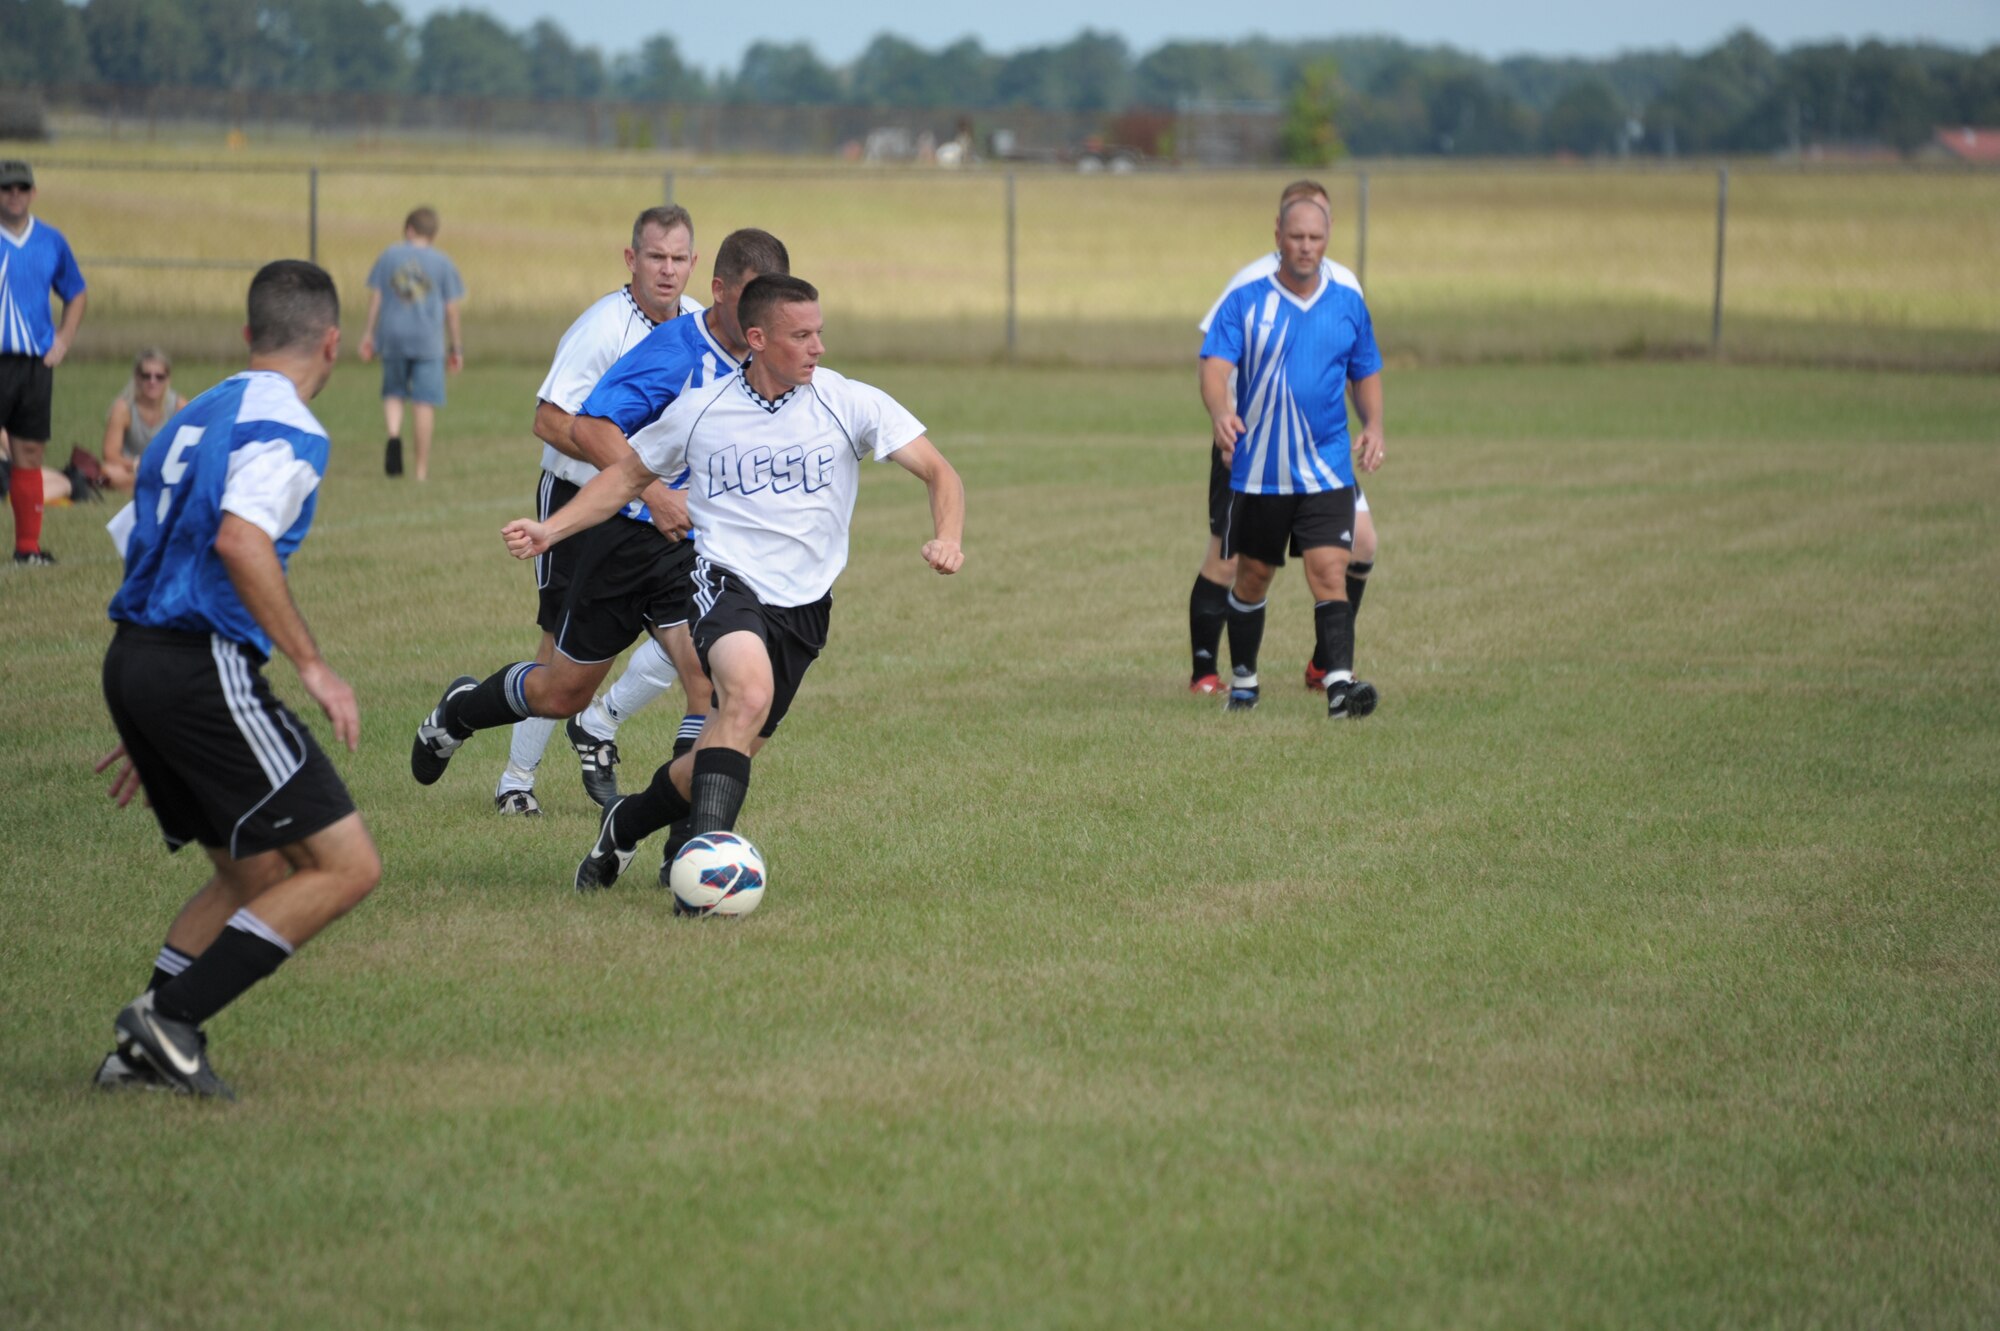 Students from Air War College and Air Command Staff College compete in a soccer match on Maxwell Air Force Base, Oct. 8. The game was part of a 2-day competition between the academic powerhouses compiling of approximately 20 events, both scholastic and athletic. (U.S. Air Force photo by Airman 1st Class William Blankenship)